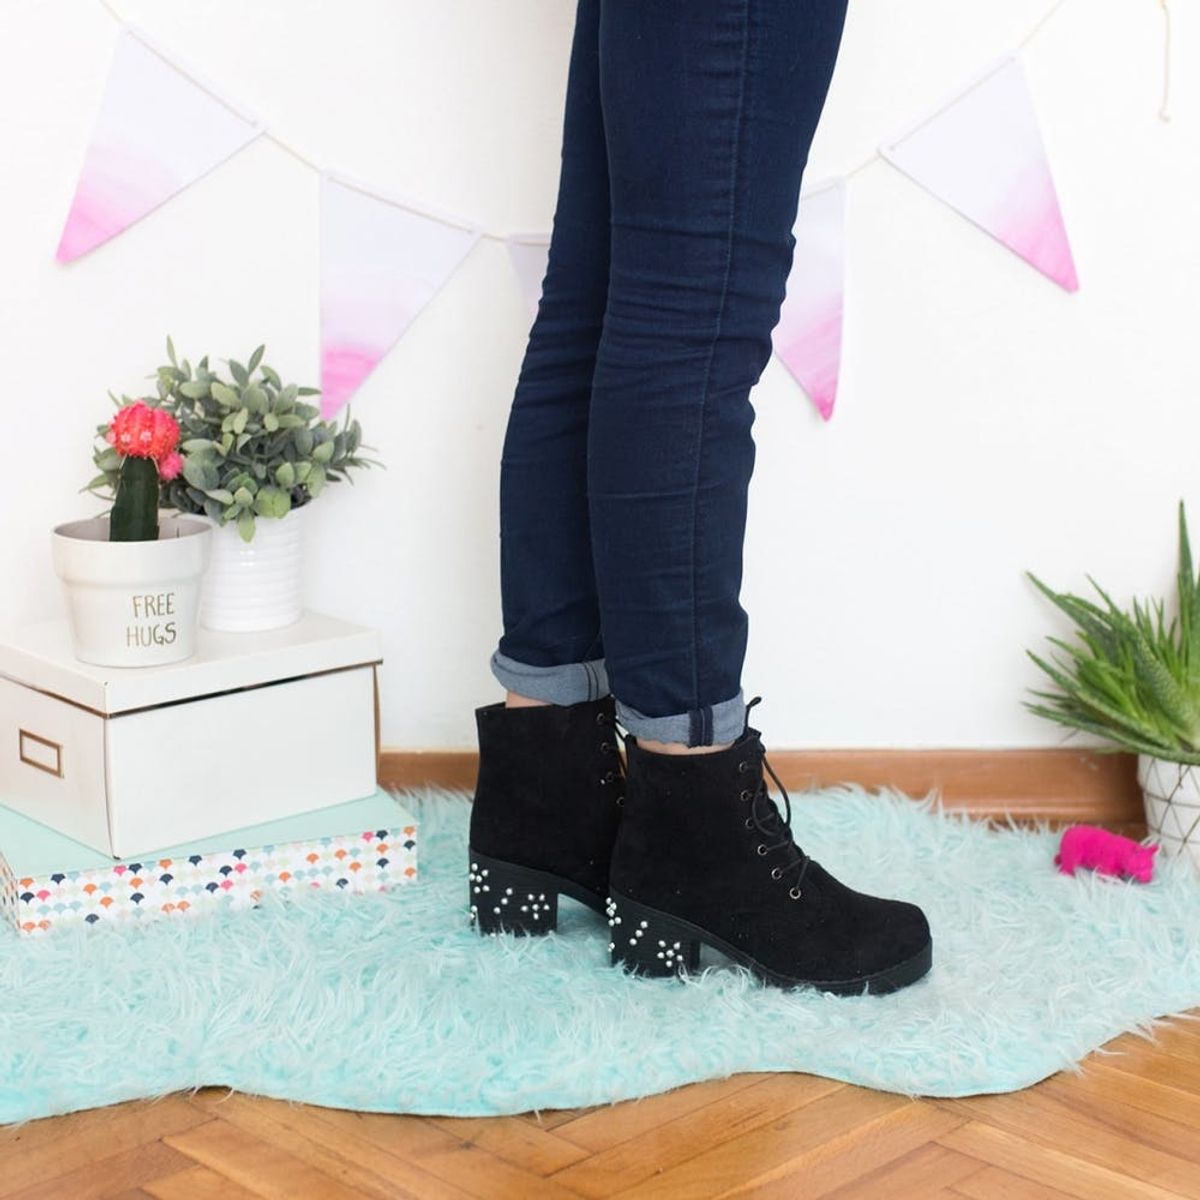 Follow These 5 Easy Steps and DIY These Chunky-Heeled Lace-Up Boots